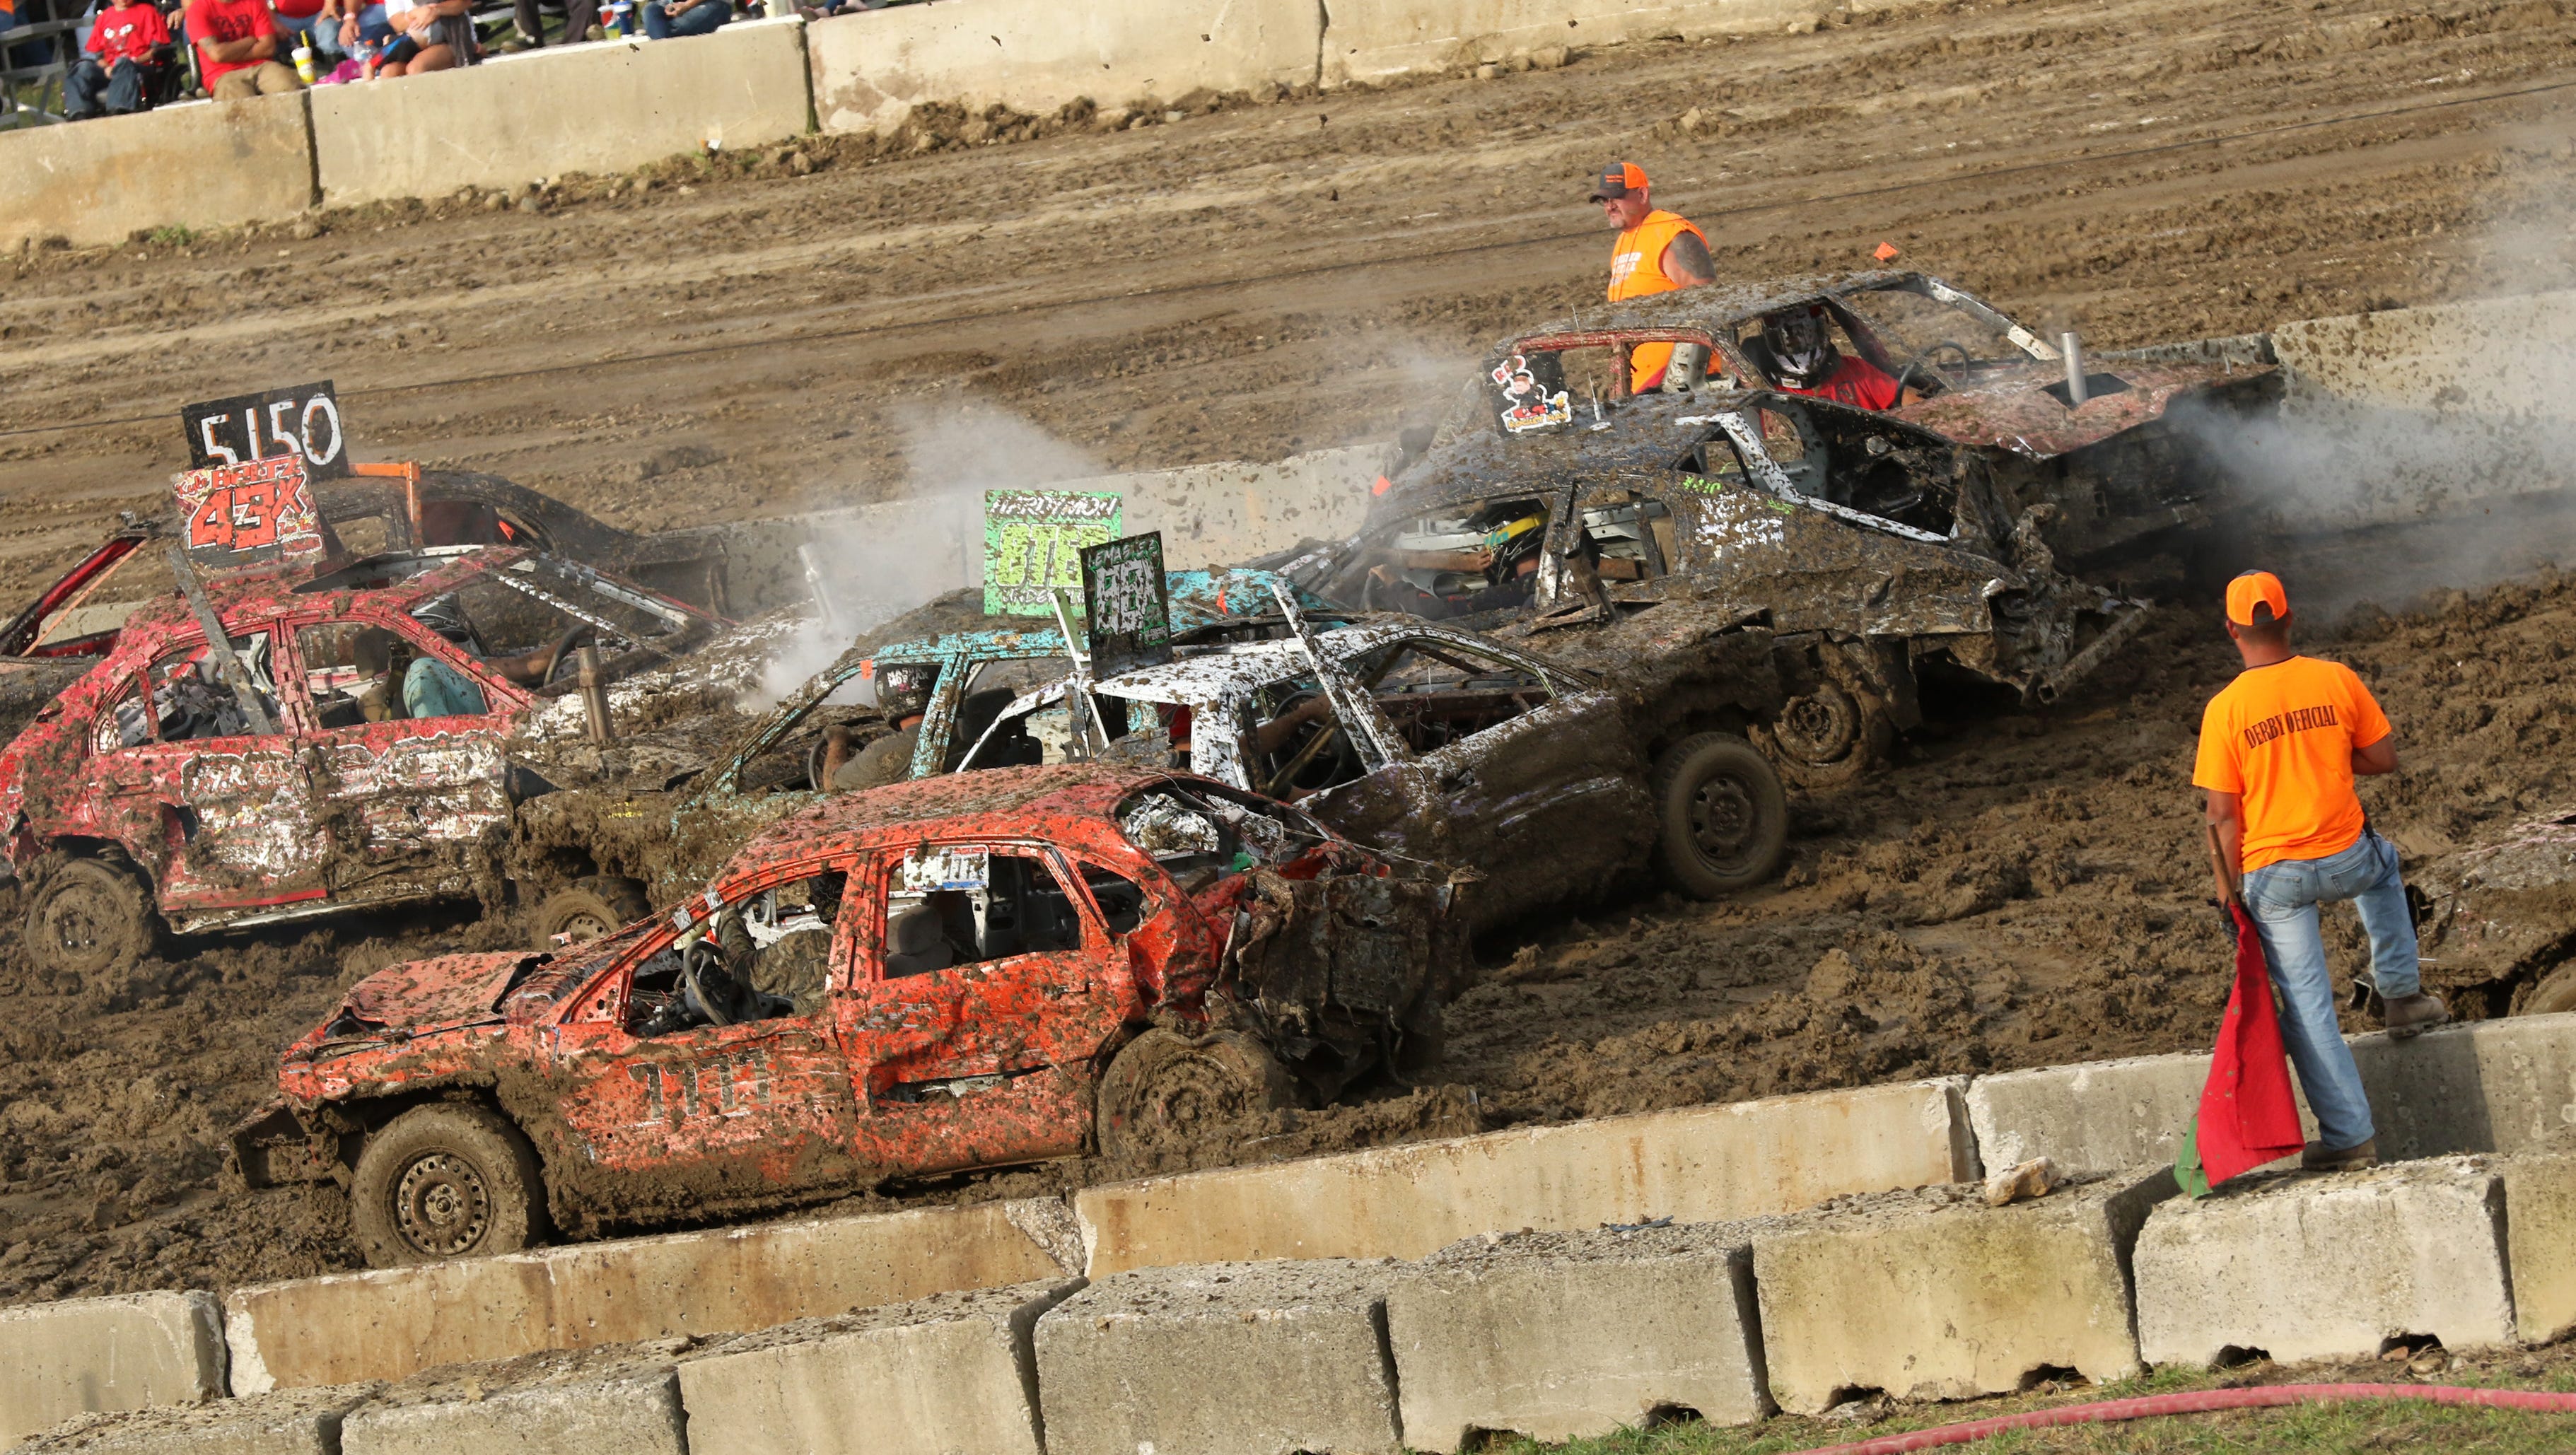 Demolition Derby caps off another year of the fair